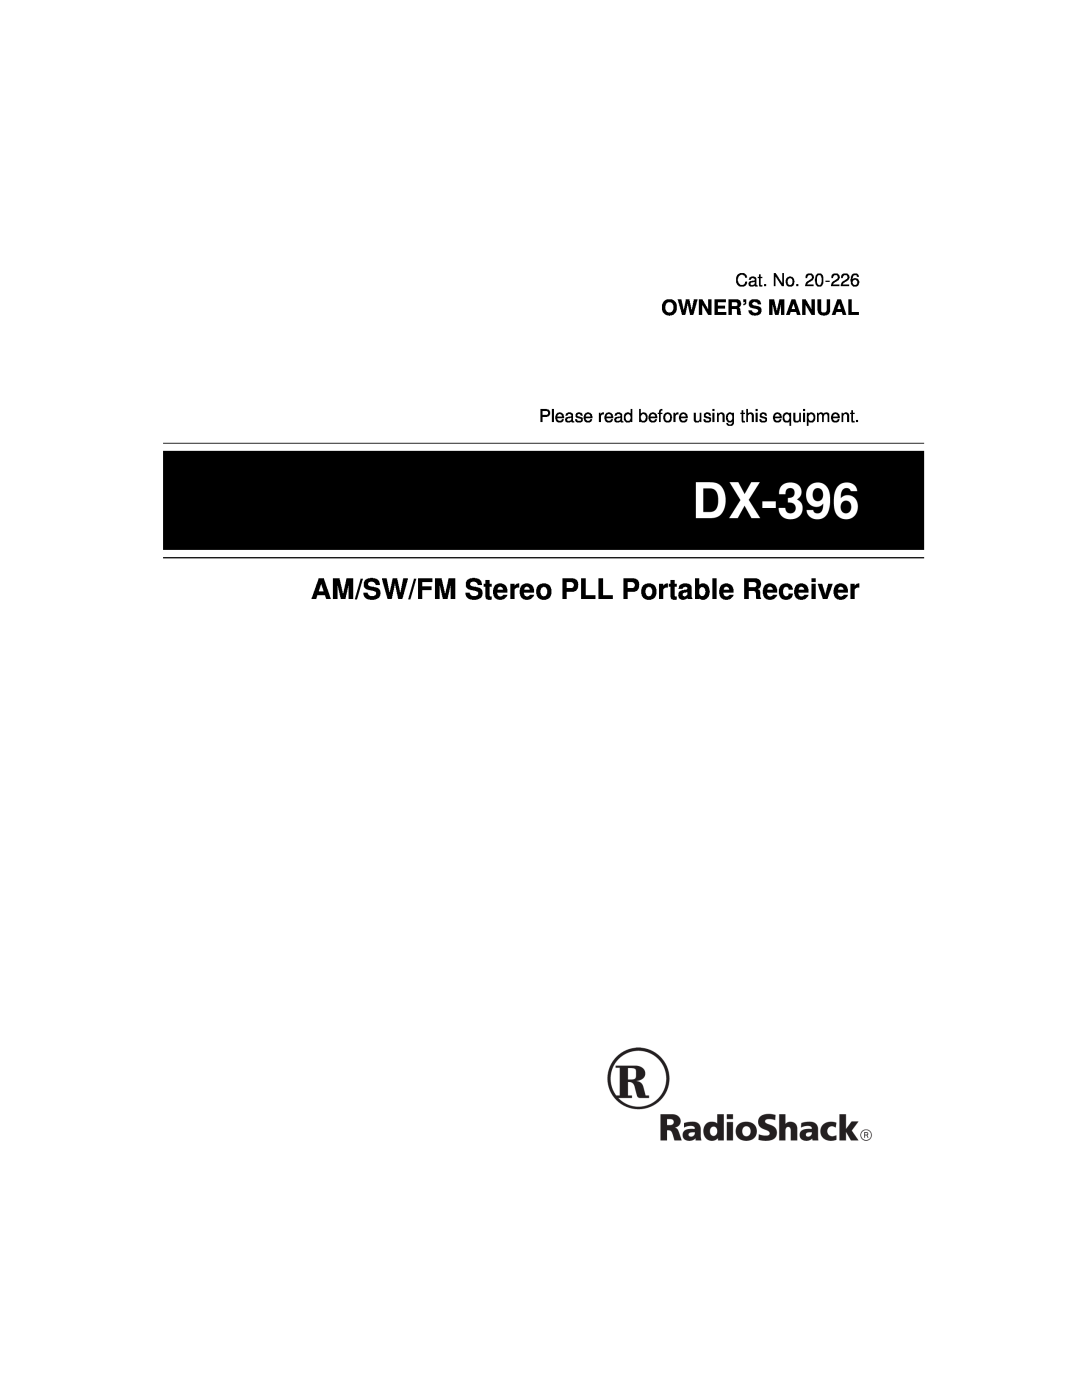 Radio Shack DX-396 owner manual AM/SW/FM Stereo PLL Portable Receiver 